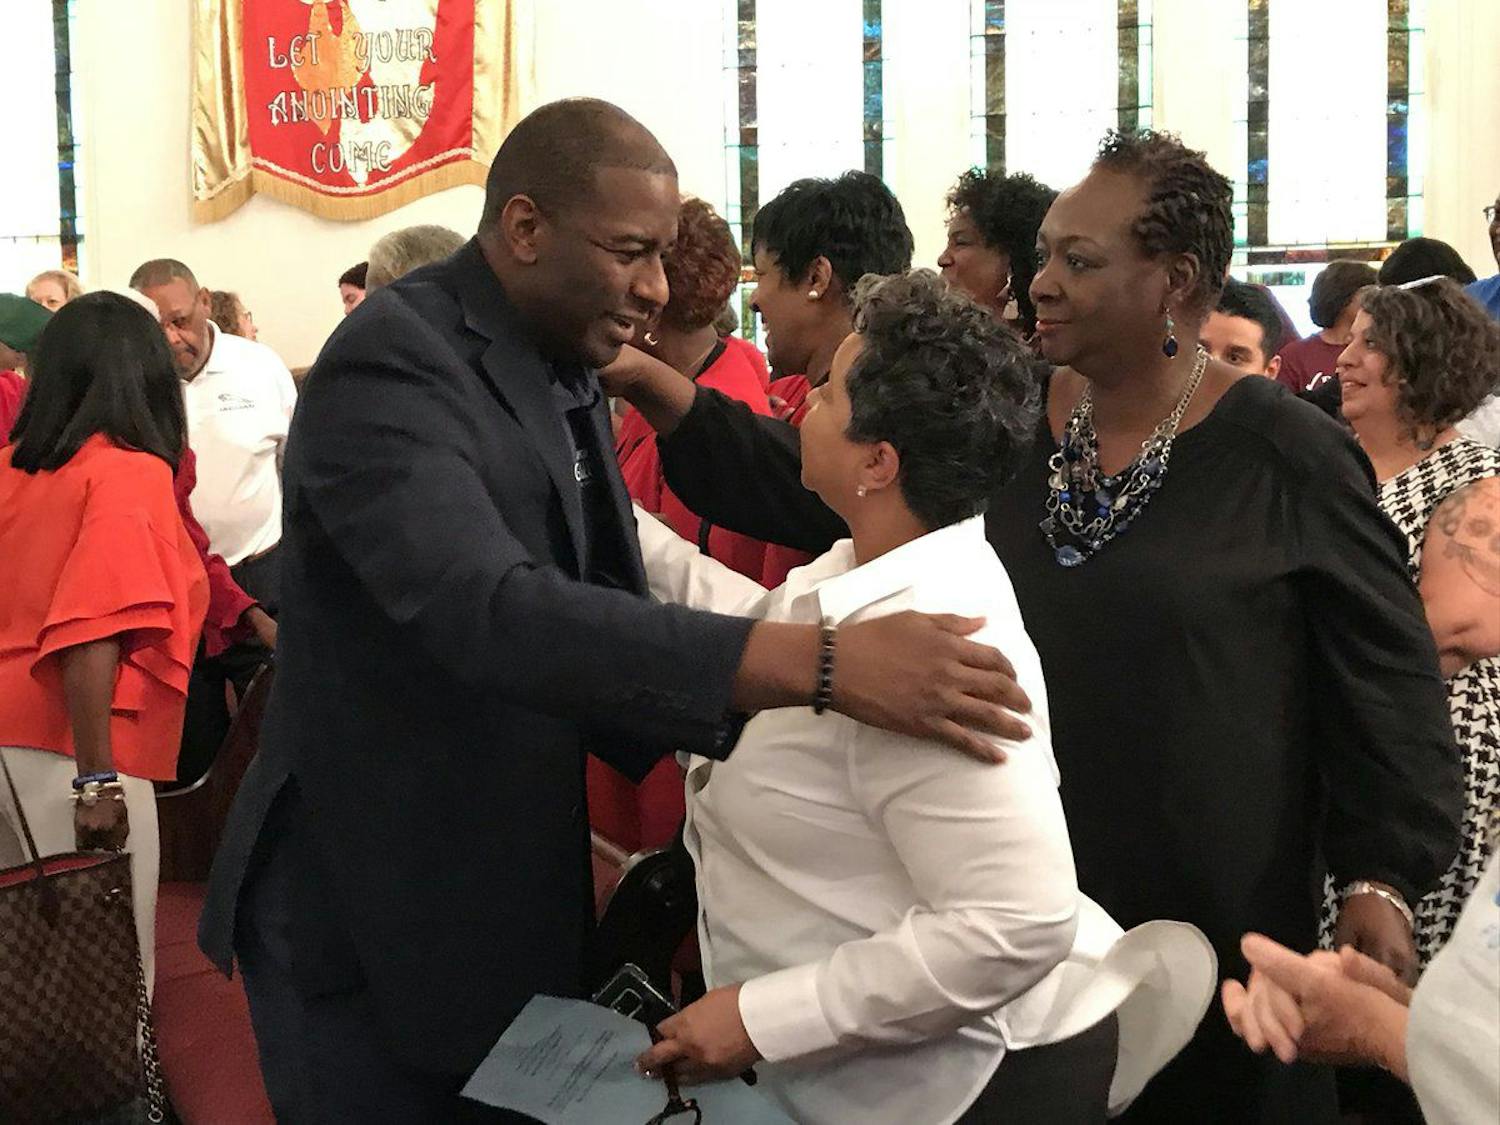 Andrew Gillum, a Florida governmental candidate, stopped in his hometown of Gainesville Monday at Mt. Pleasant United Methodist Church to meet and talk with supporters.
&nbsp;